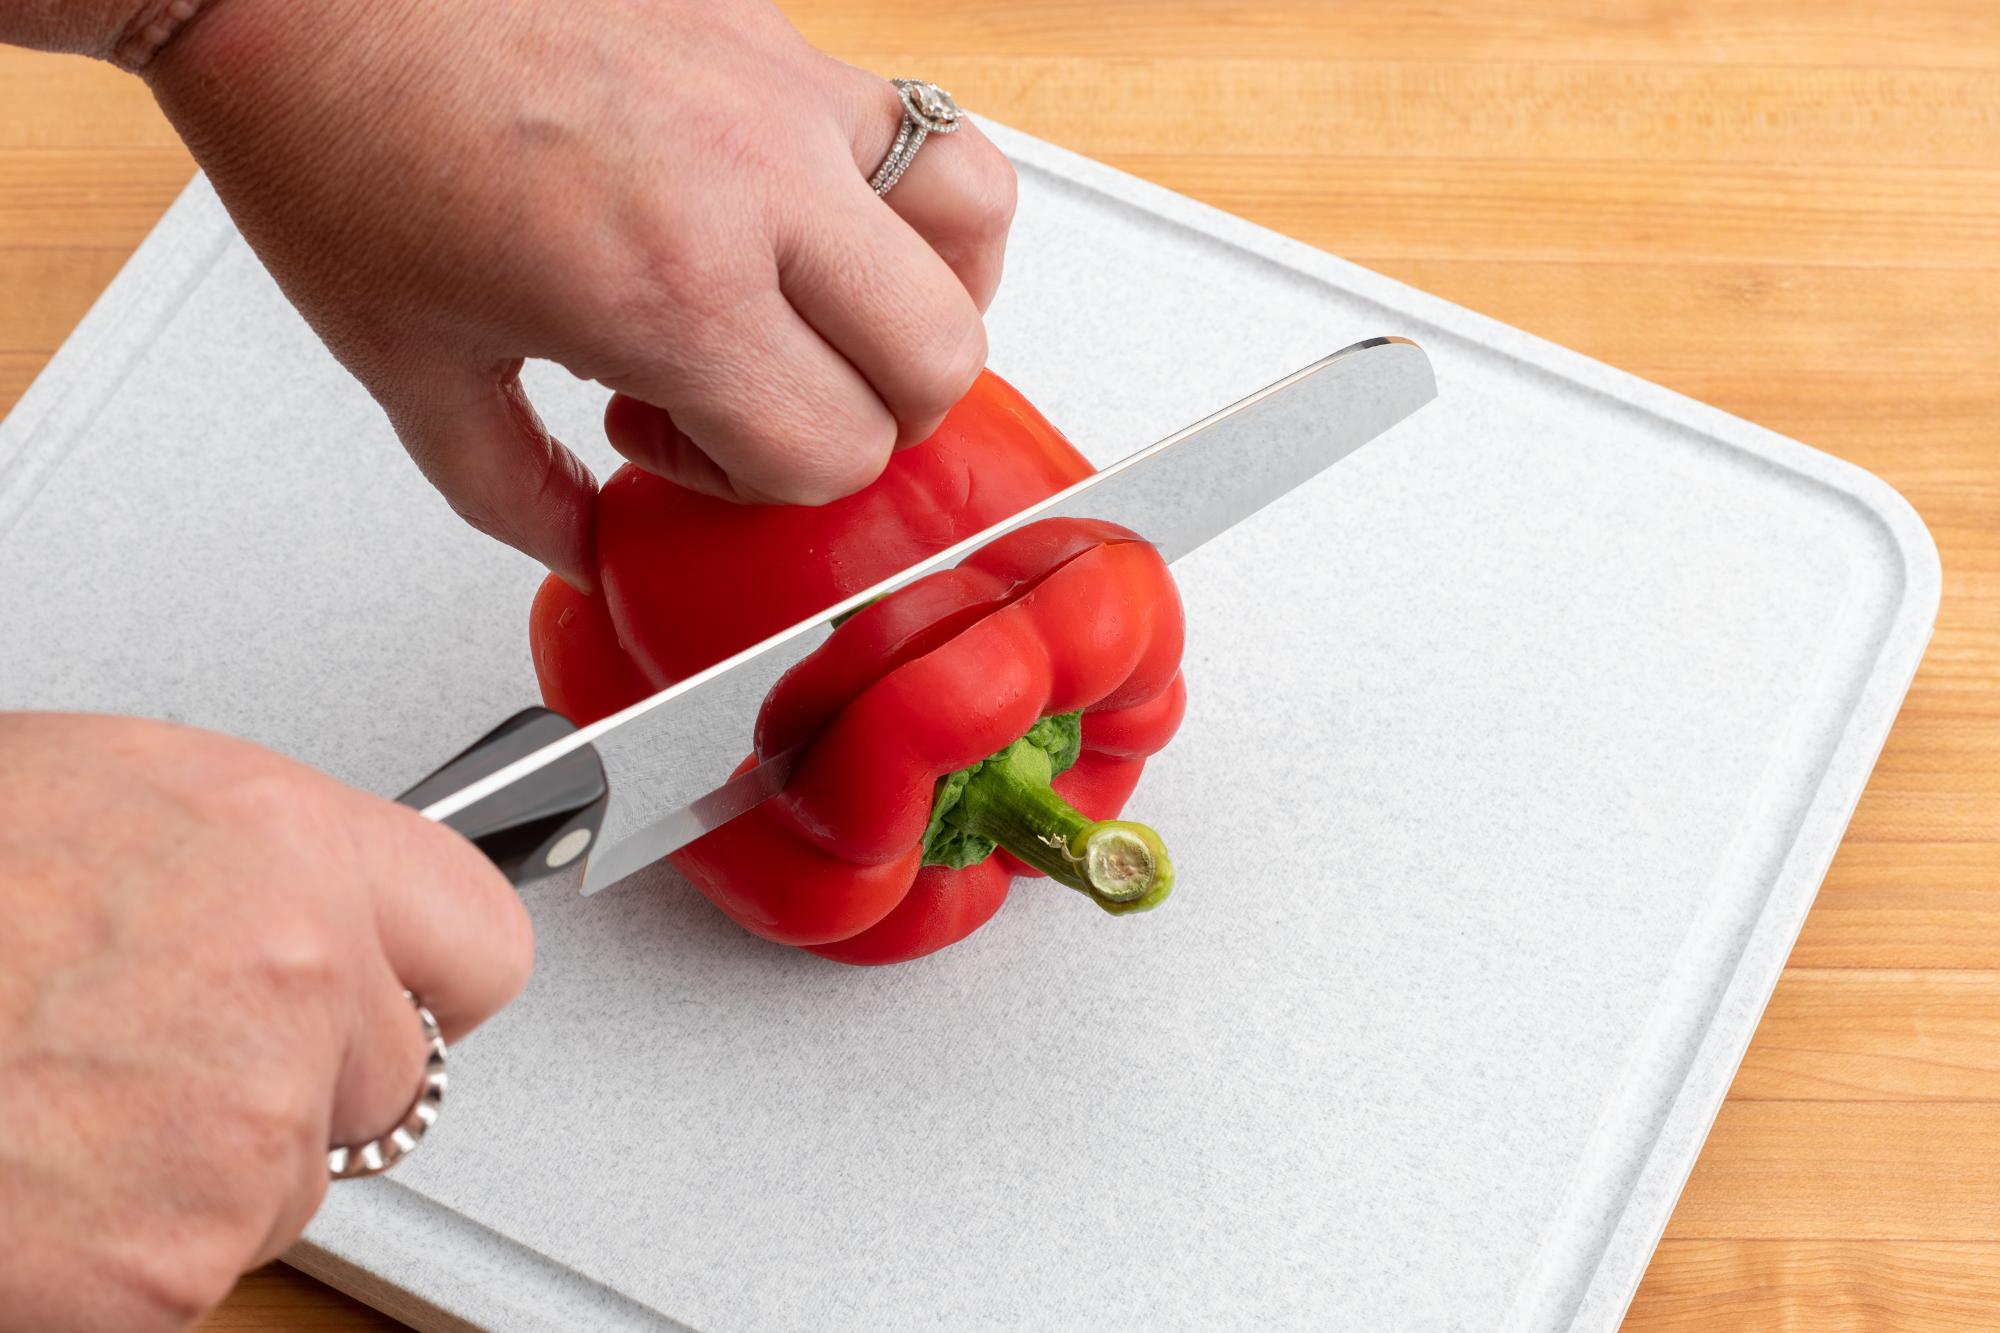 Slicing the red pepper with a Santoku.